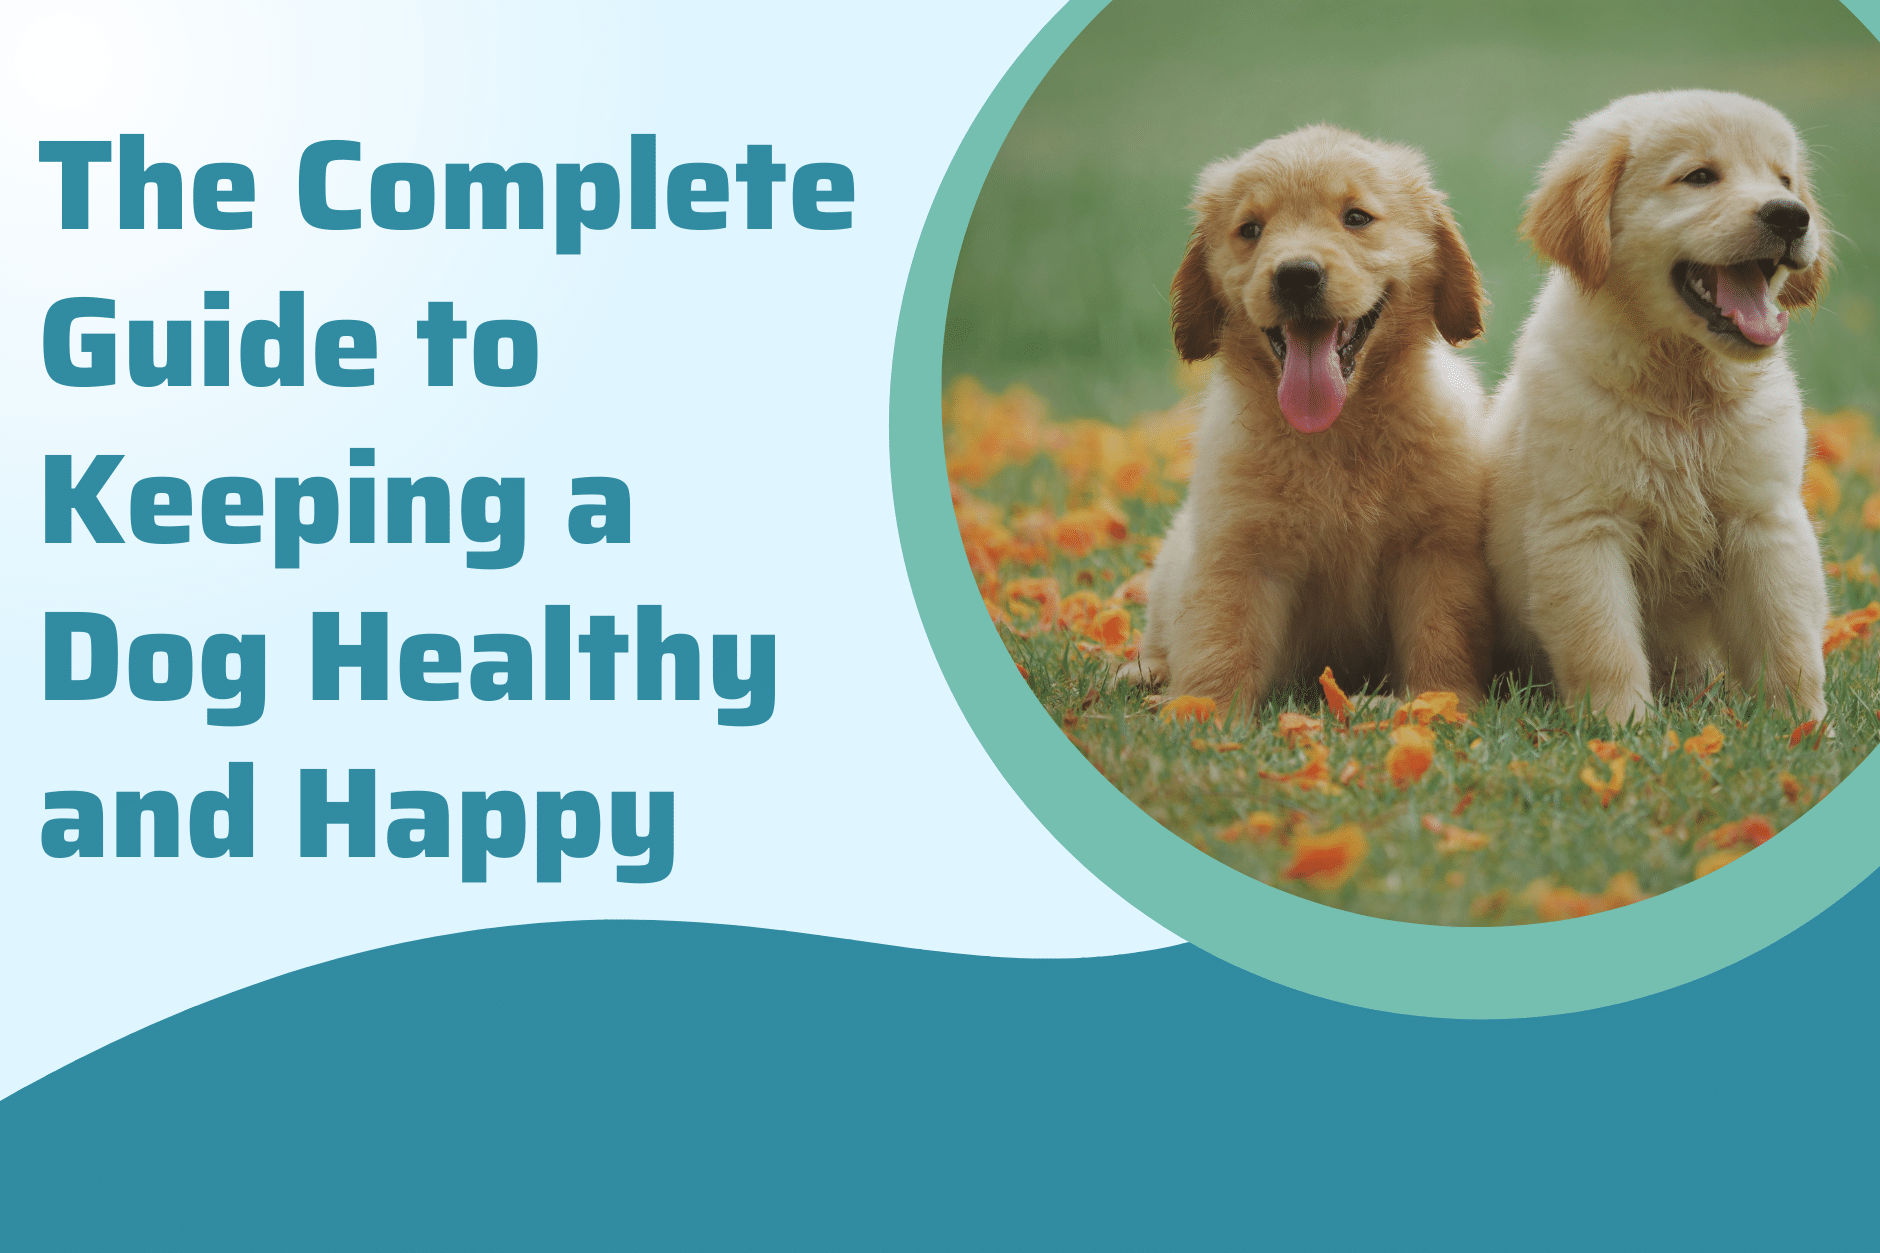 The Complete Guide to Keeping a Dog Healthy and Happy